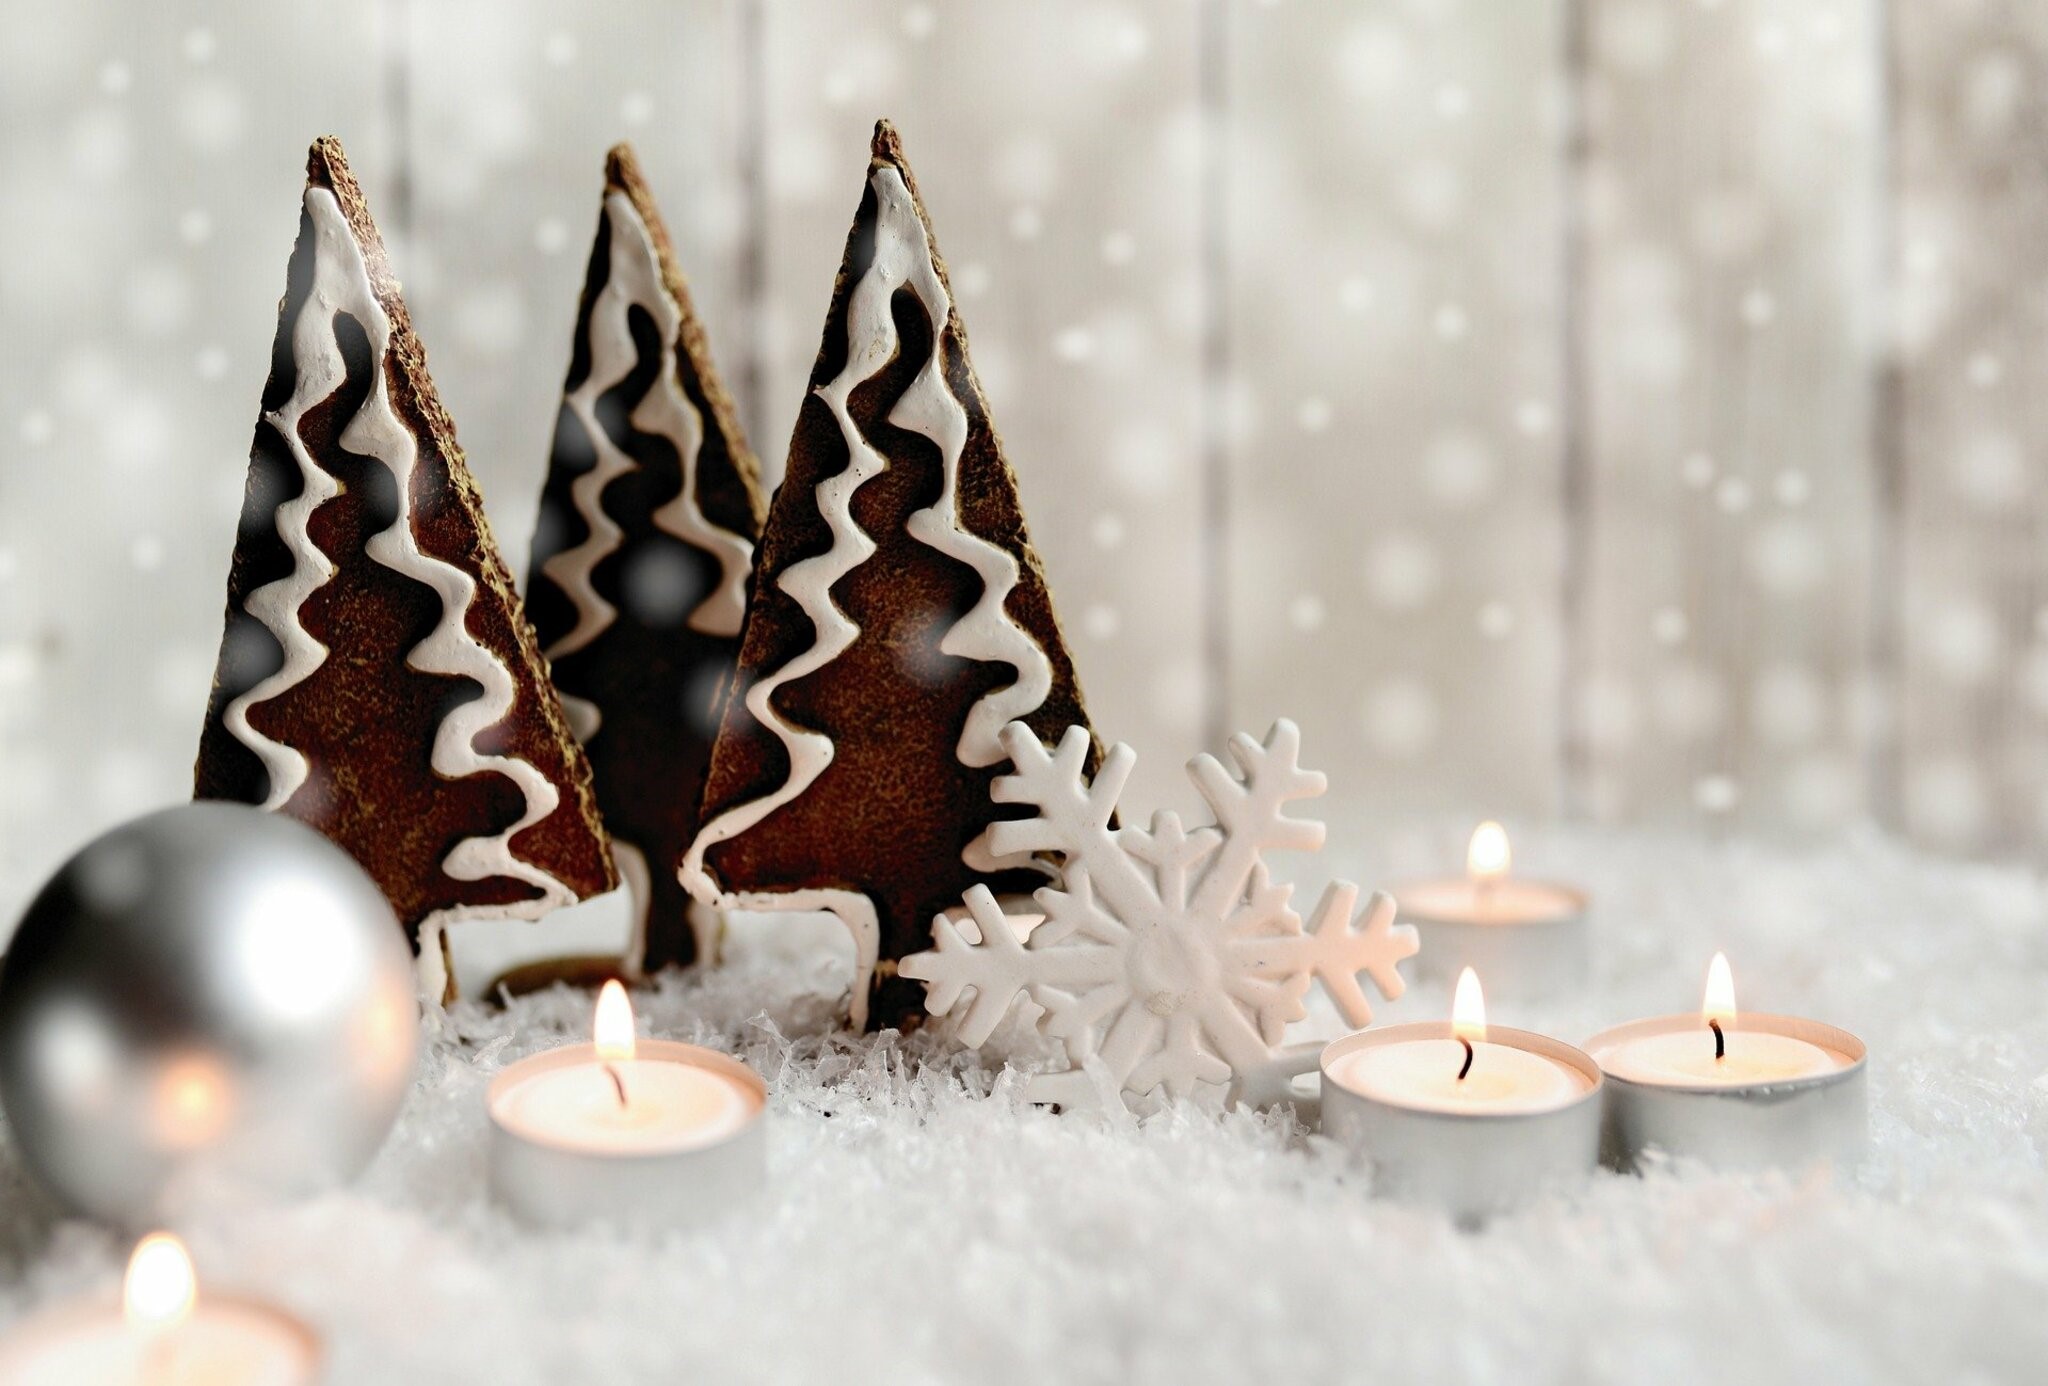 Christmas decorations and candles